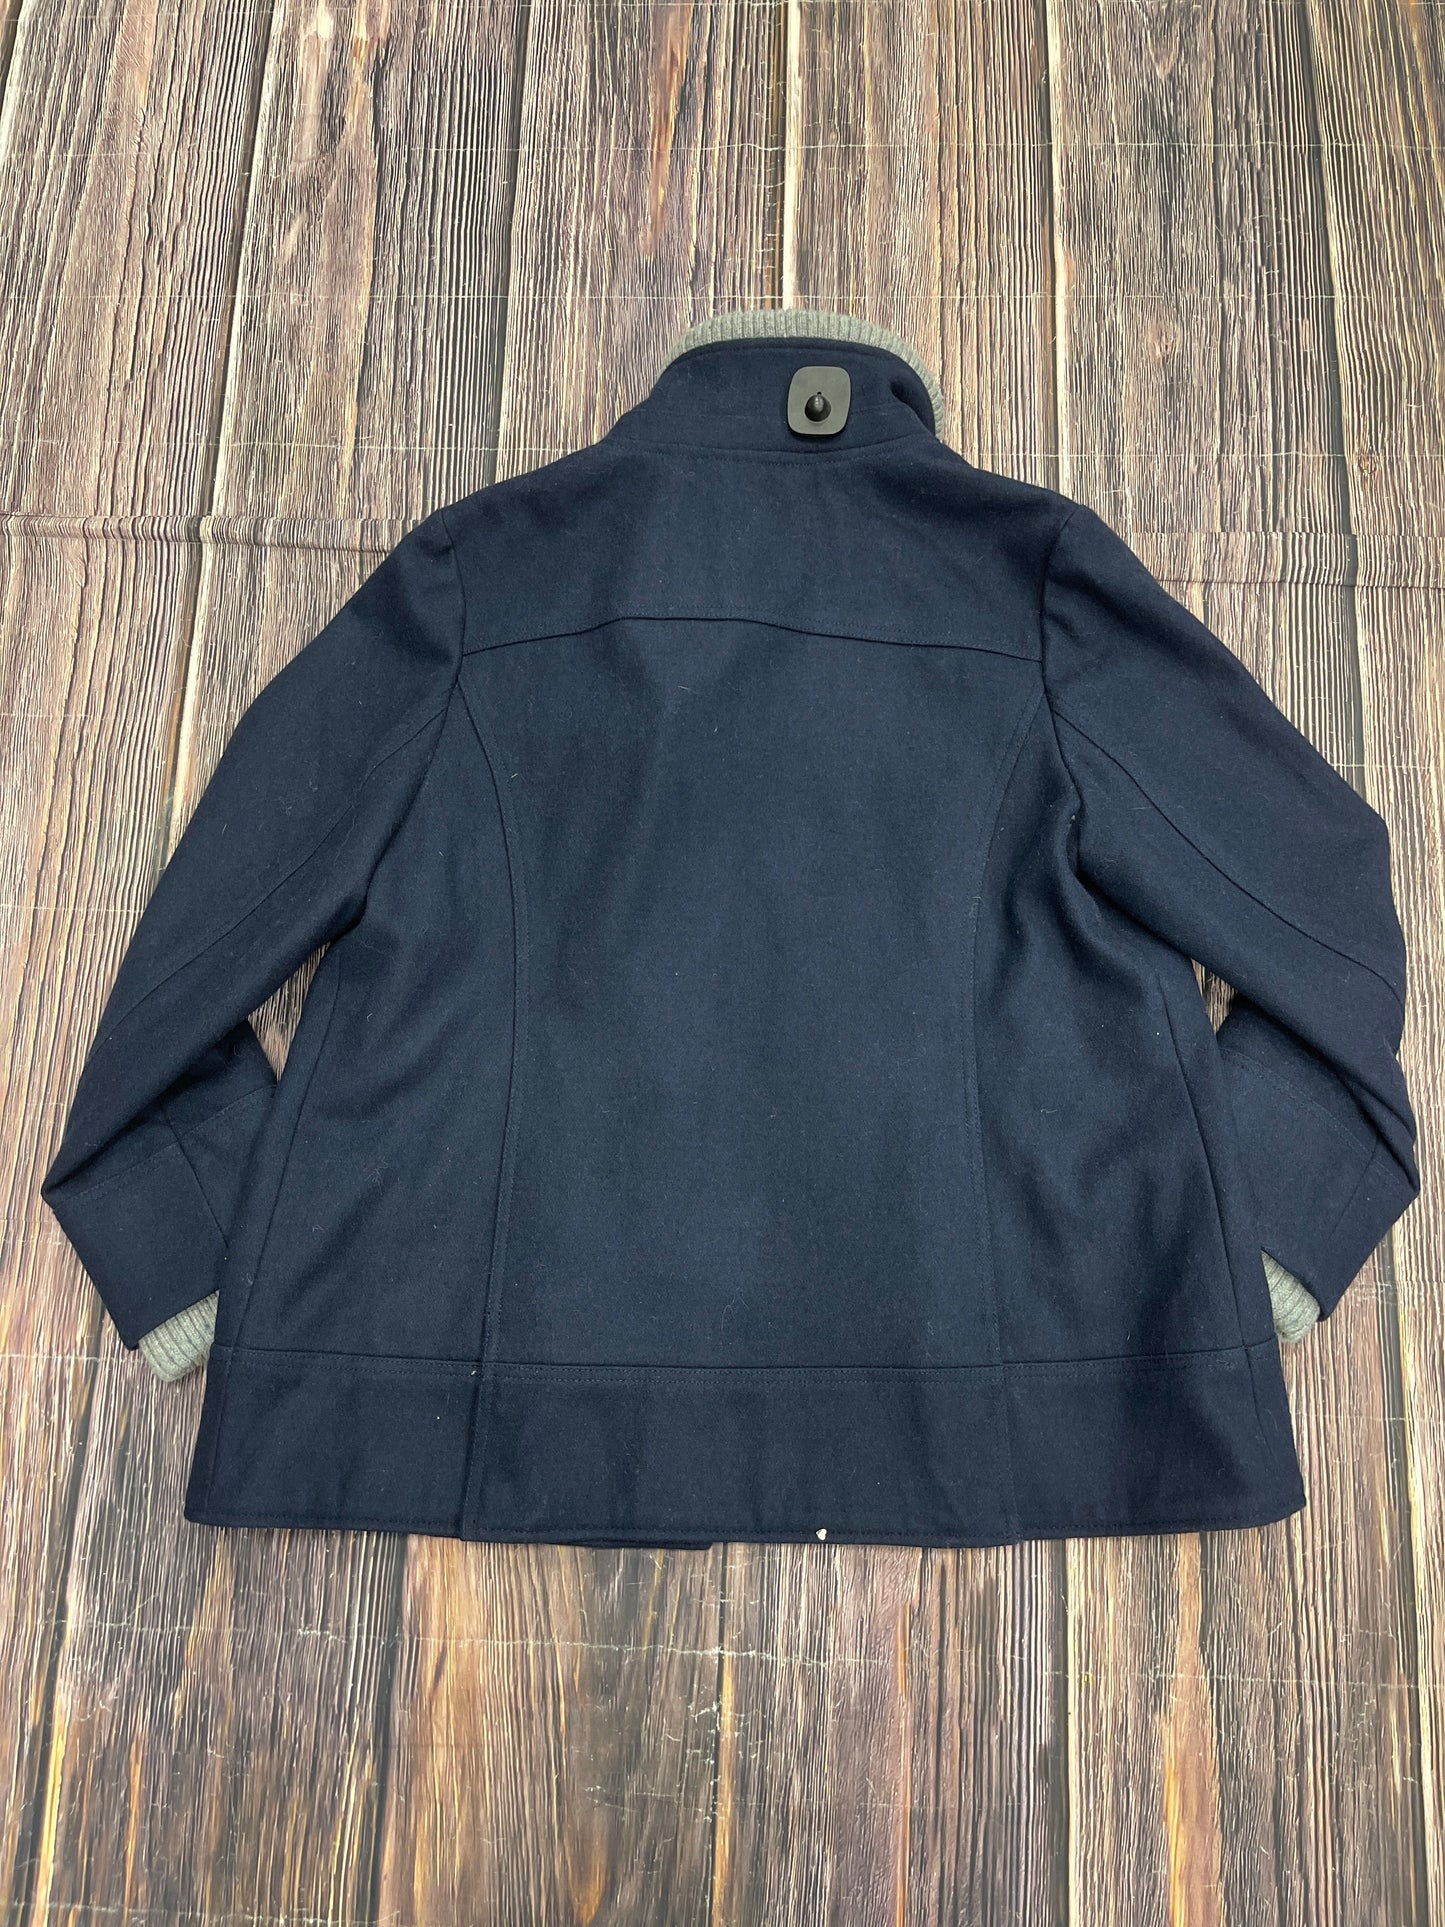 Coat Peacoat By Tommy Hilfiger  Size: Xl